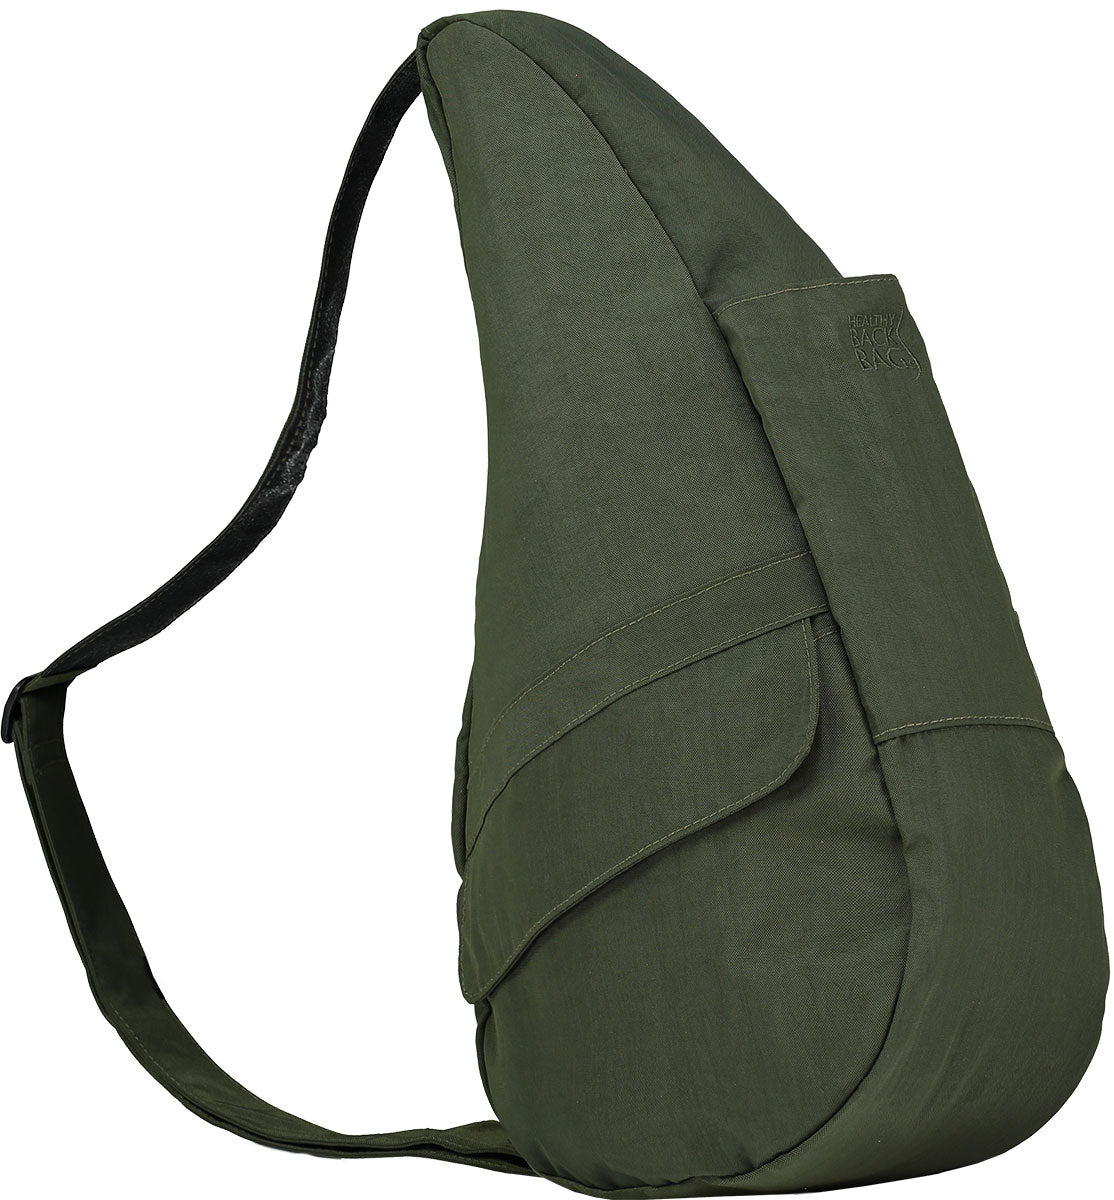 AmeriBag Healthy Back Bag tote Distressed Nylon Extra Small (Deep Forest)